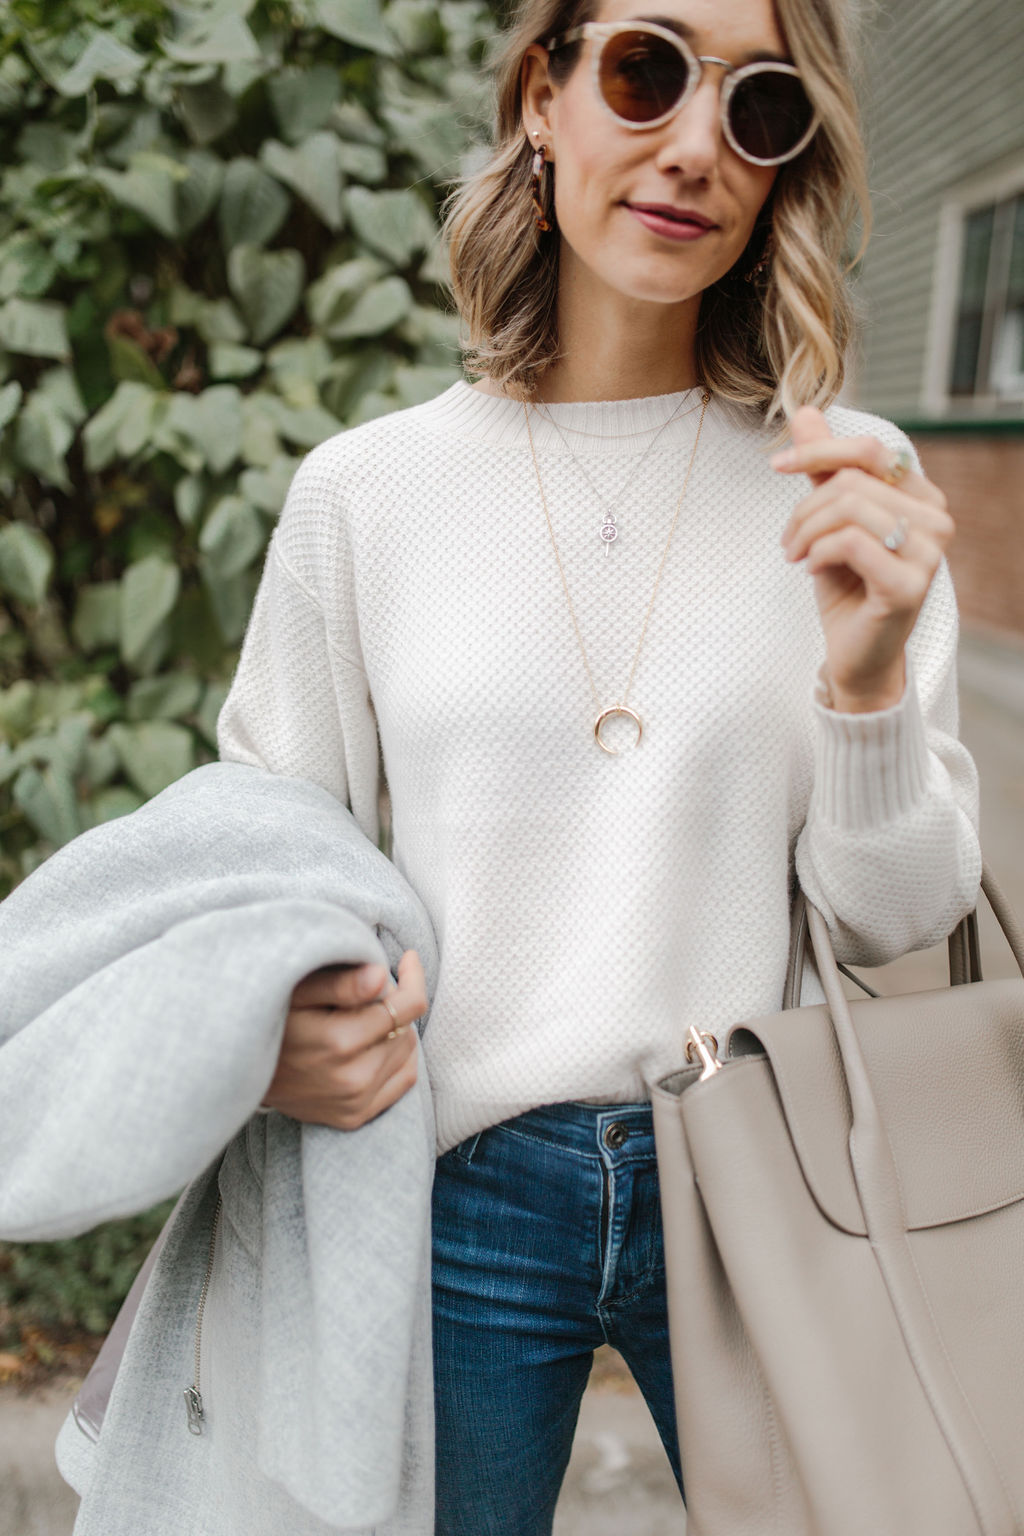 everlane sweater outfit